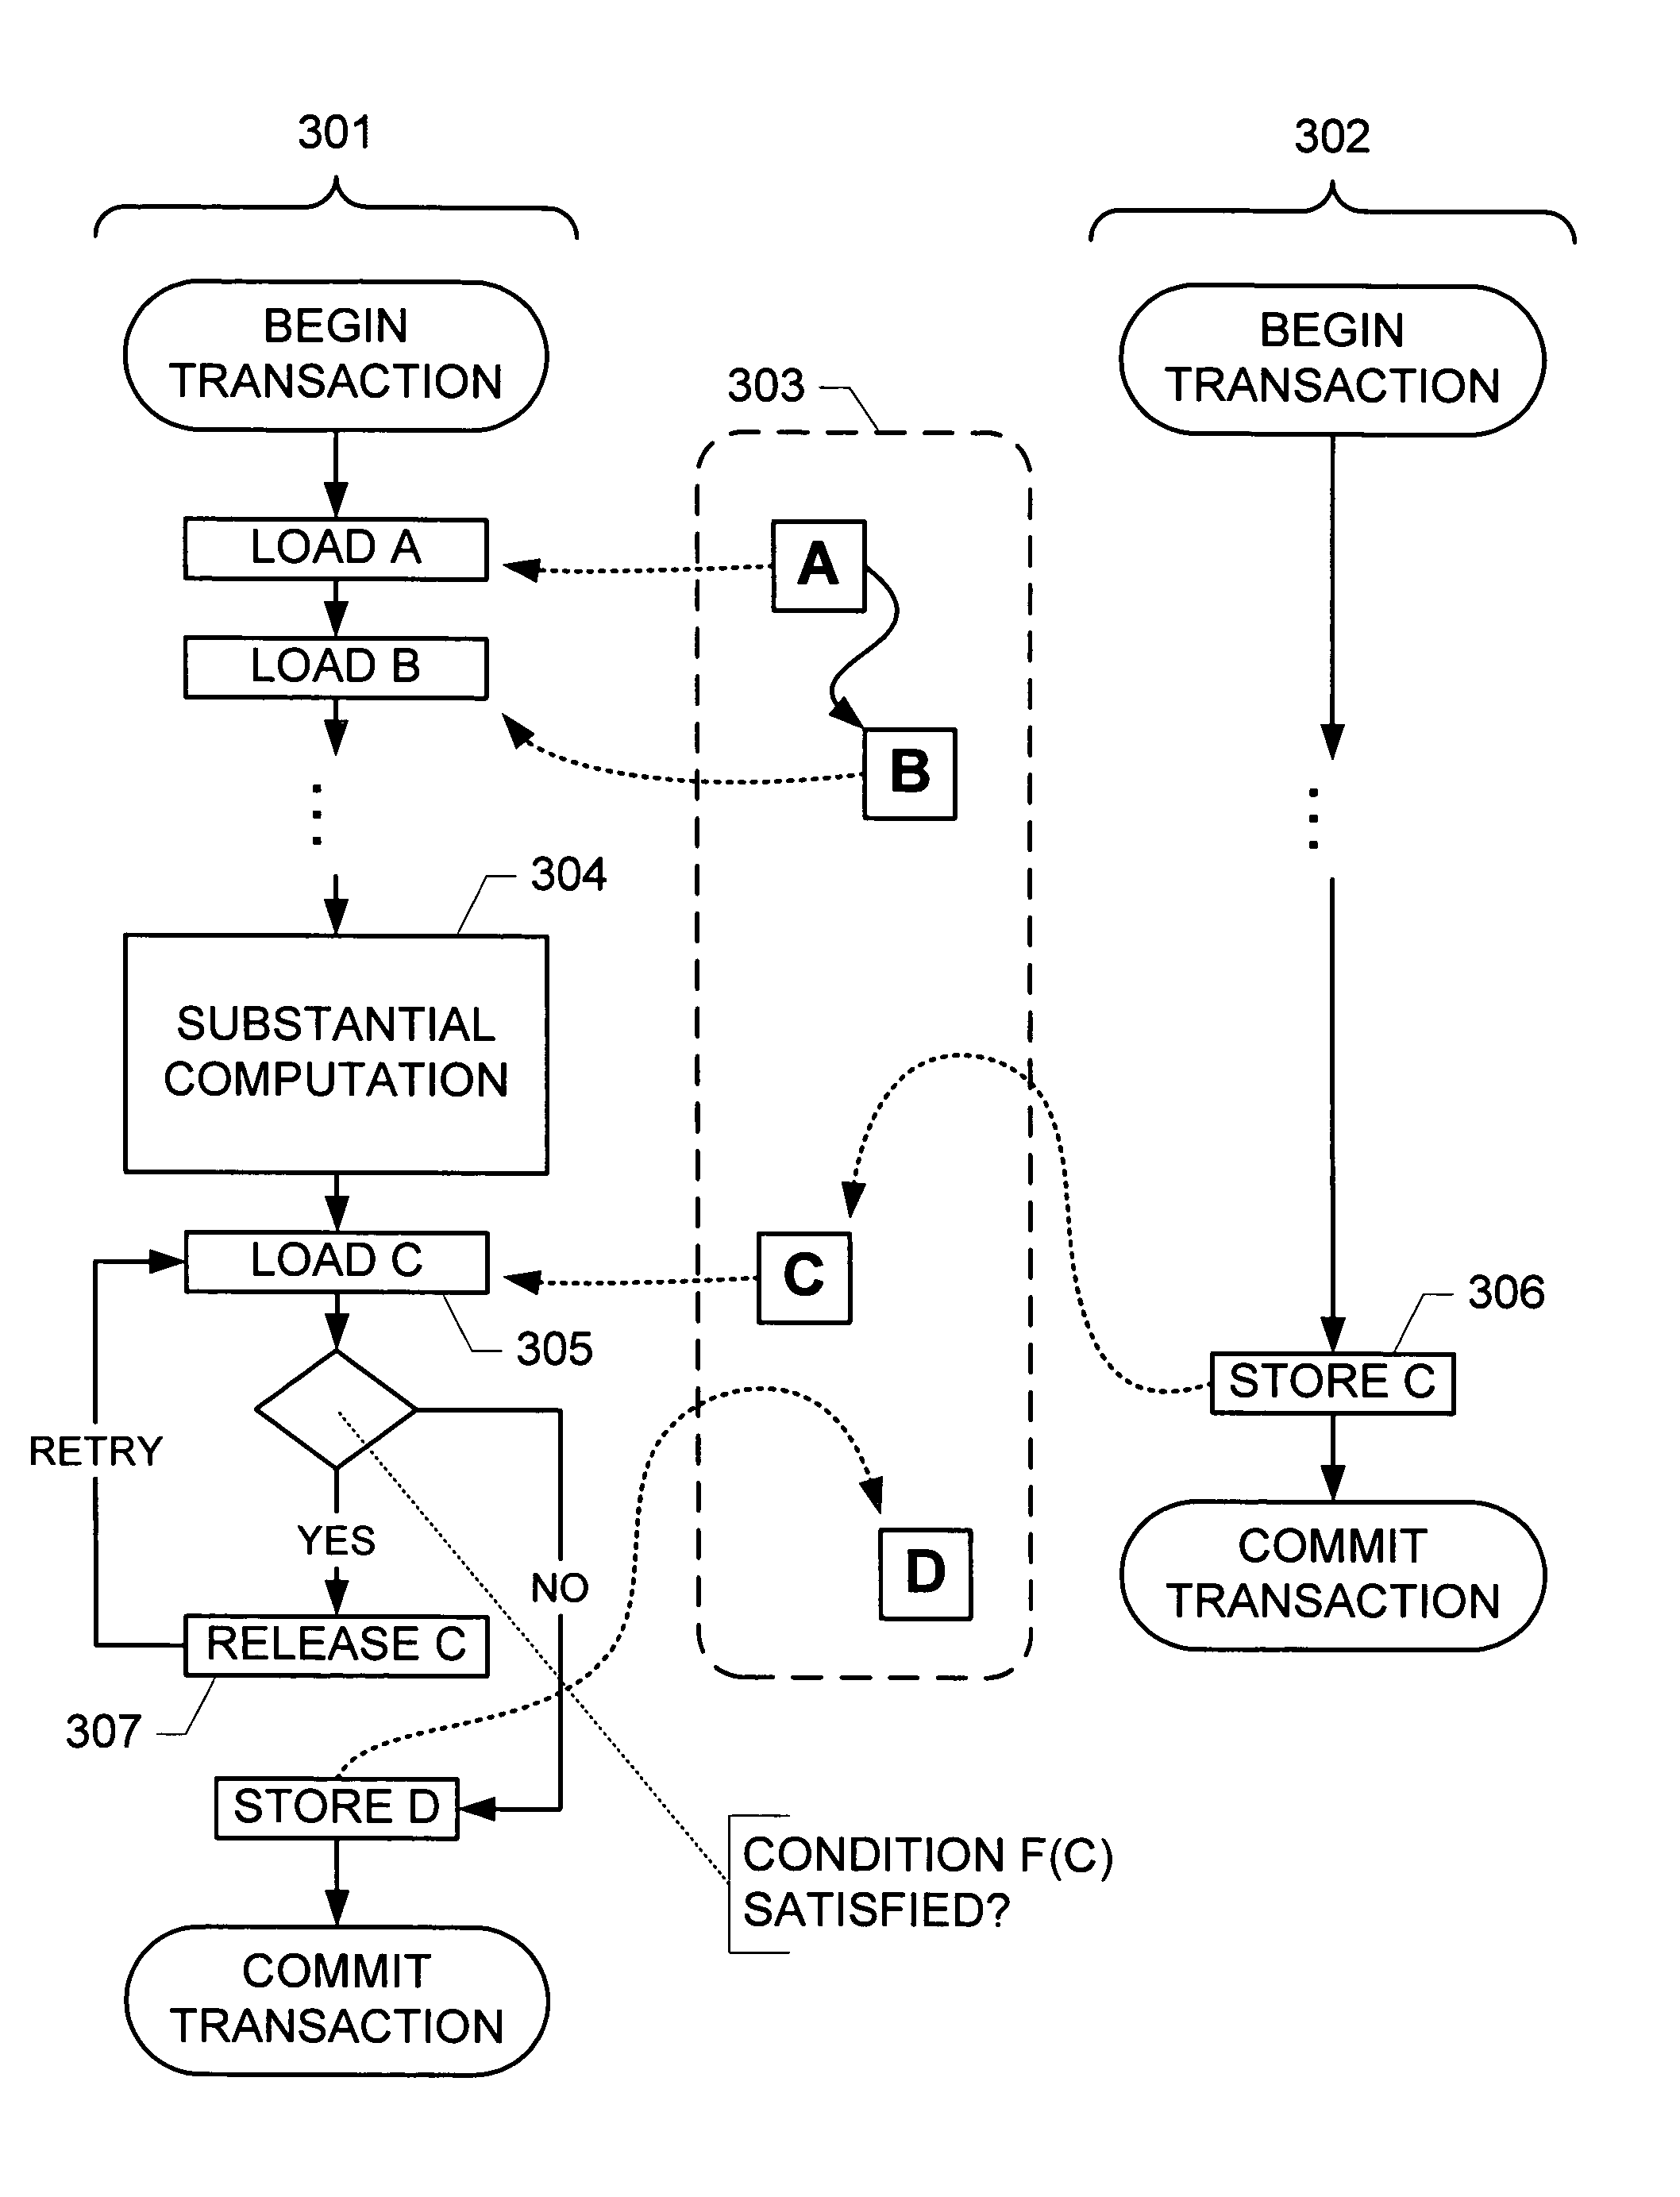 Technique to allow a first transaction to wait on condition that affects its working set